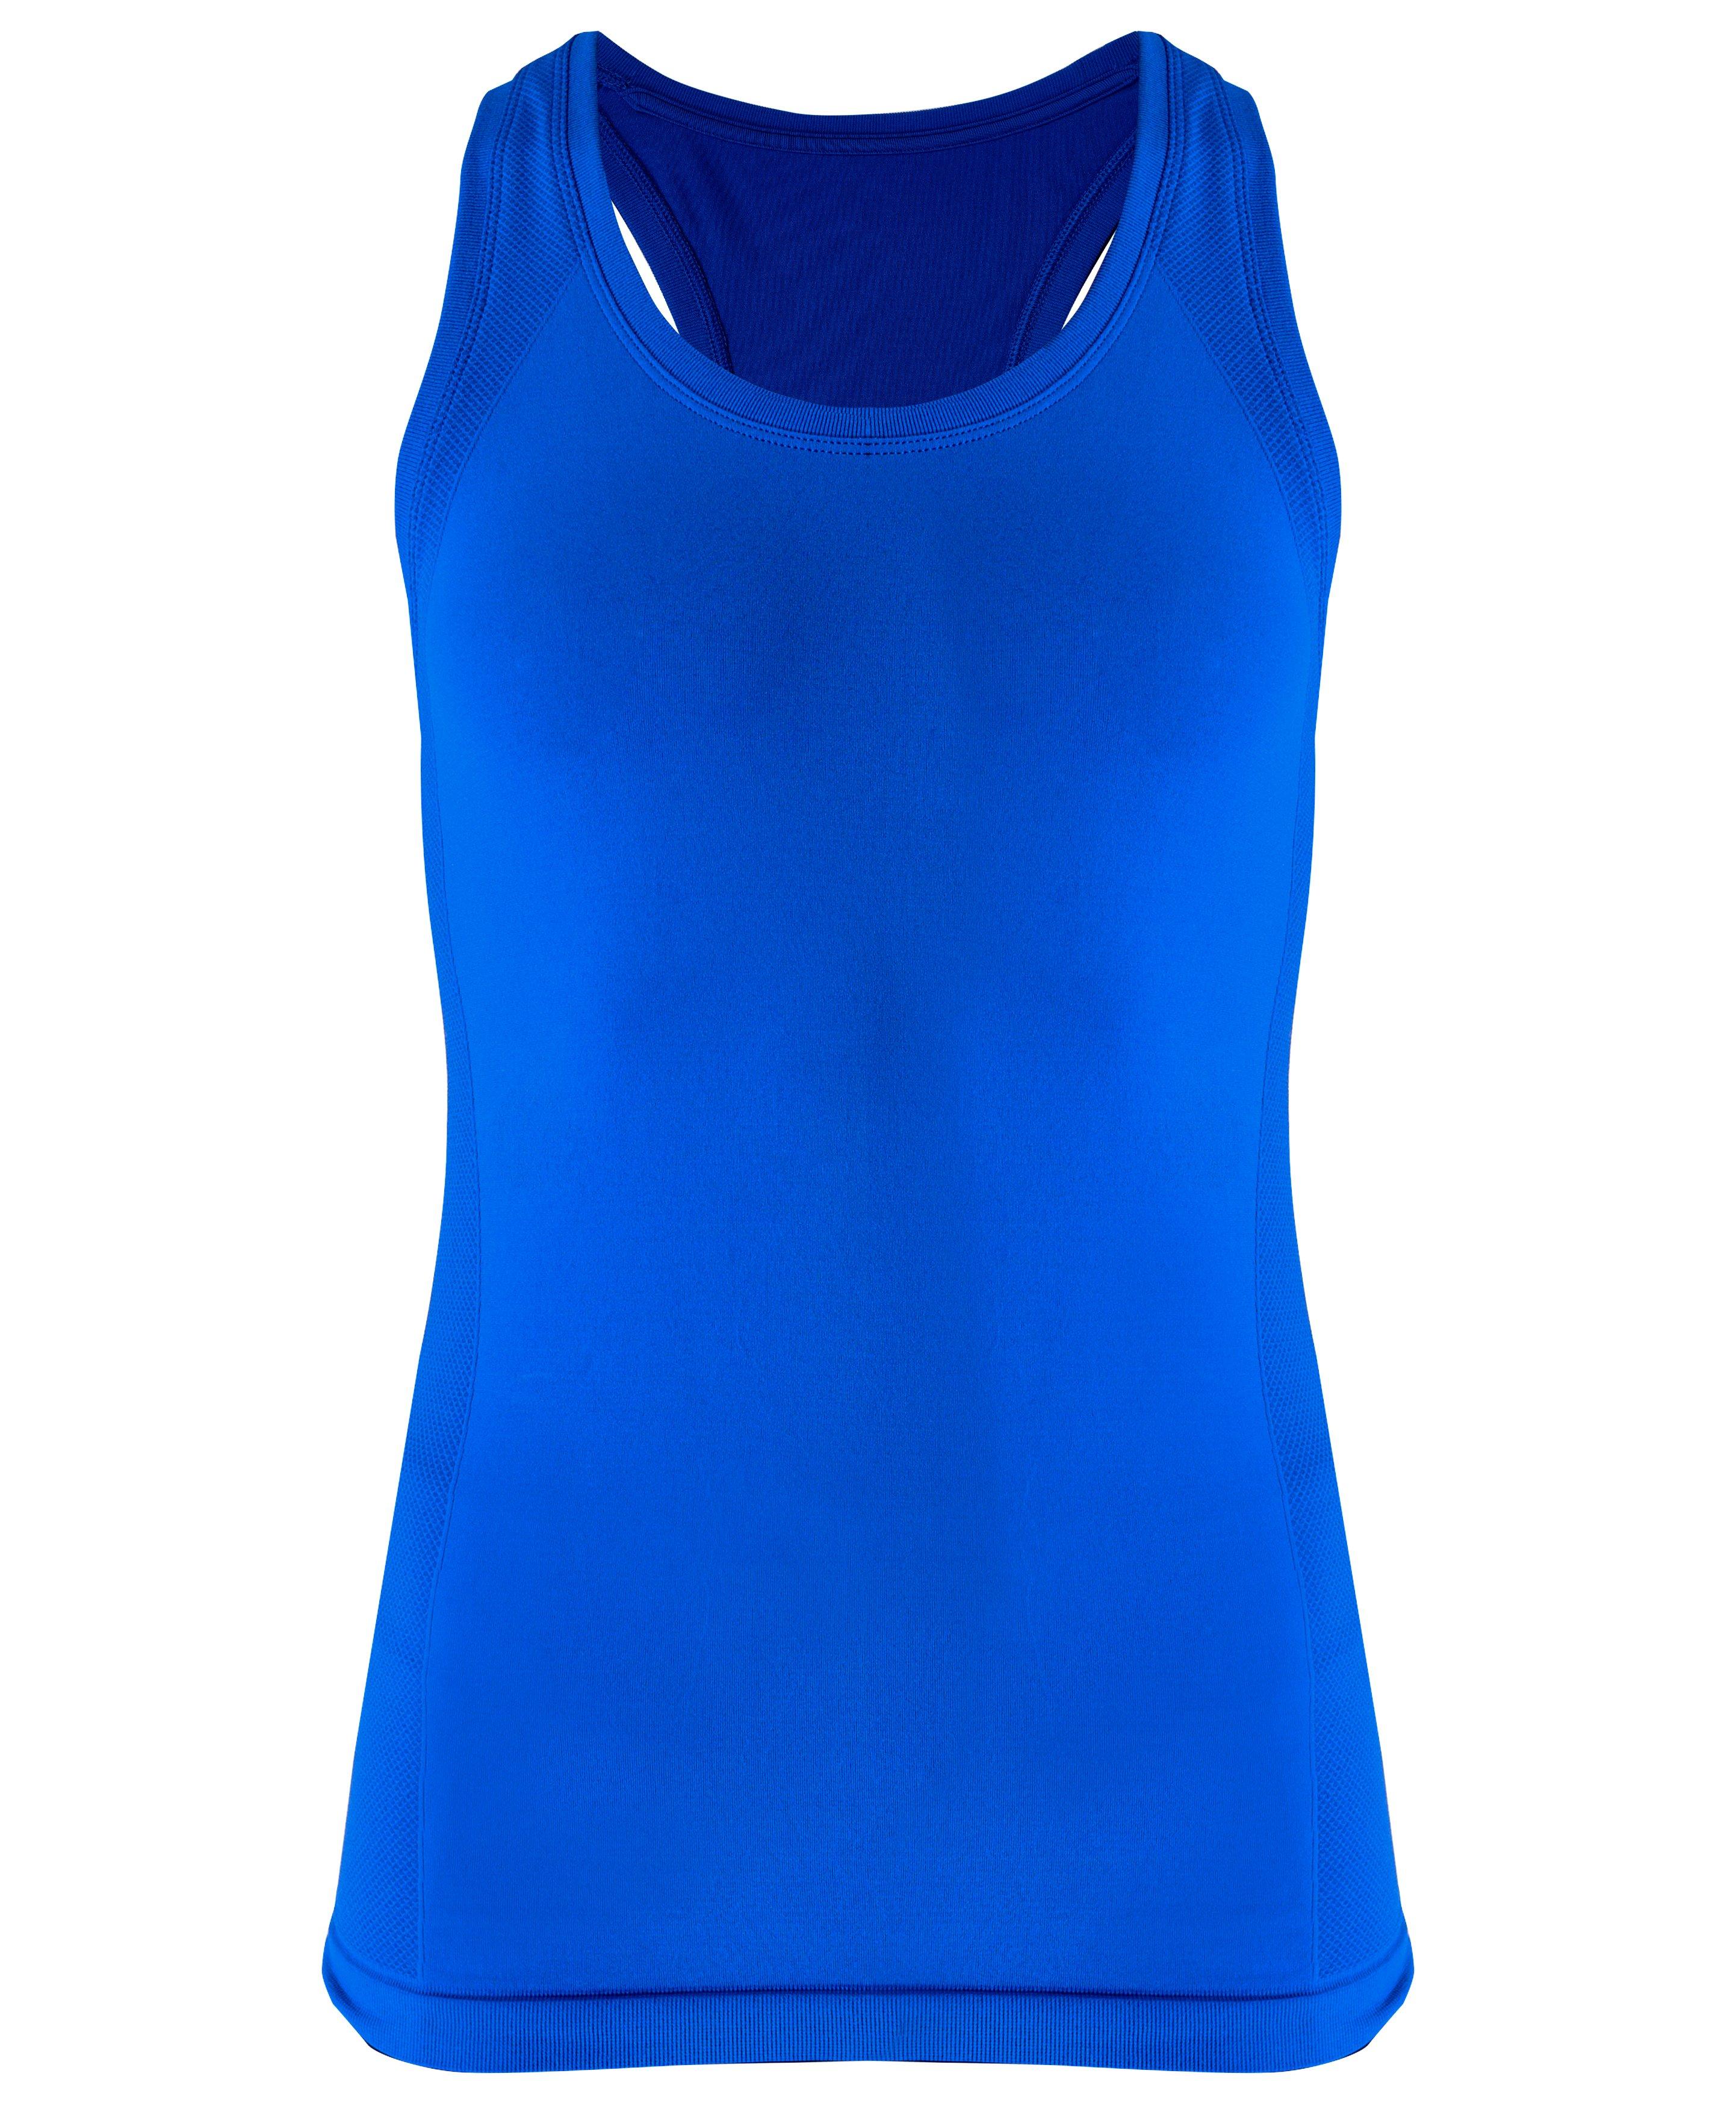 Adidas Tank Top with Built in Bra Womens Large Blue Breathable Gym Shirt  Jersey